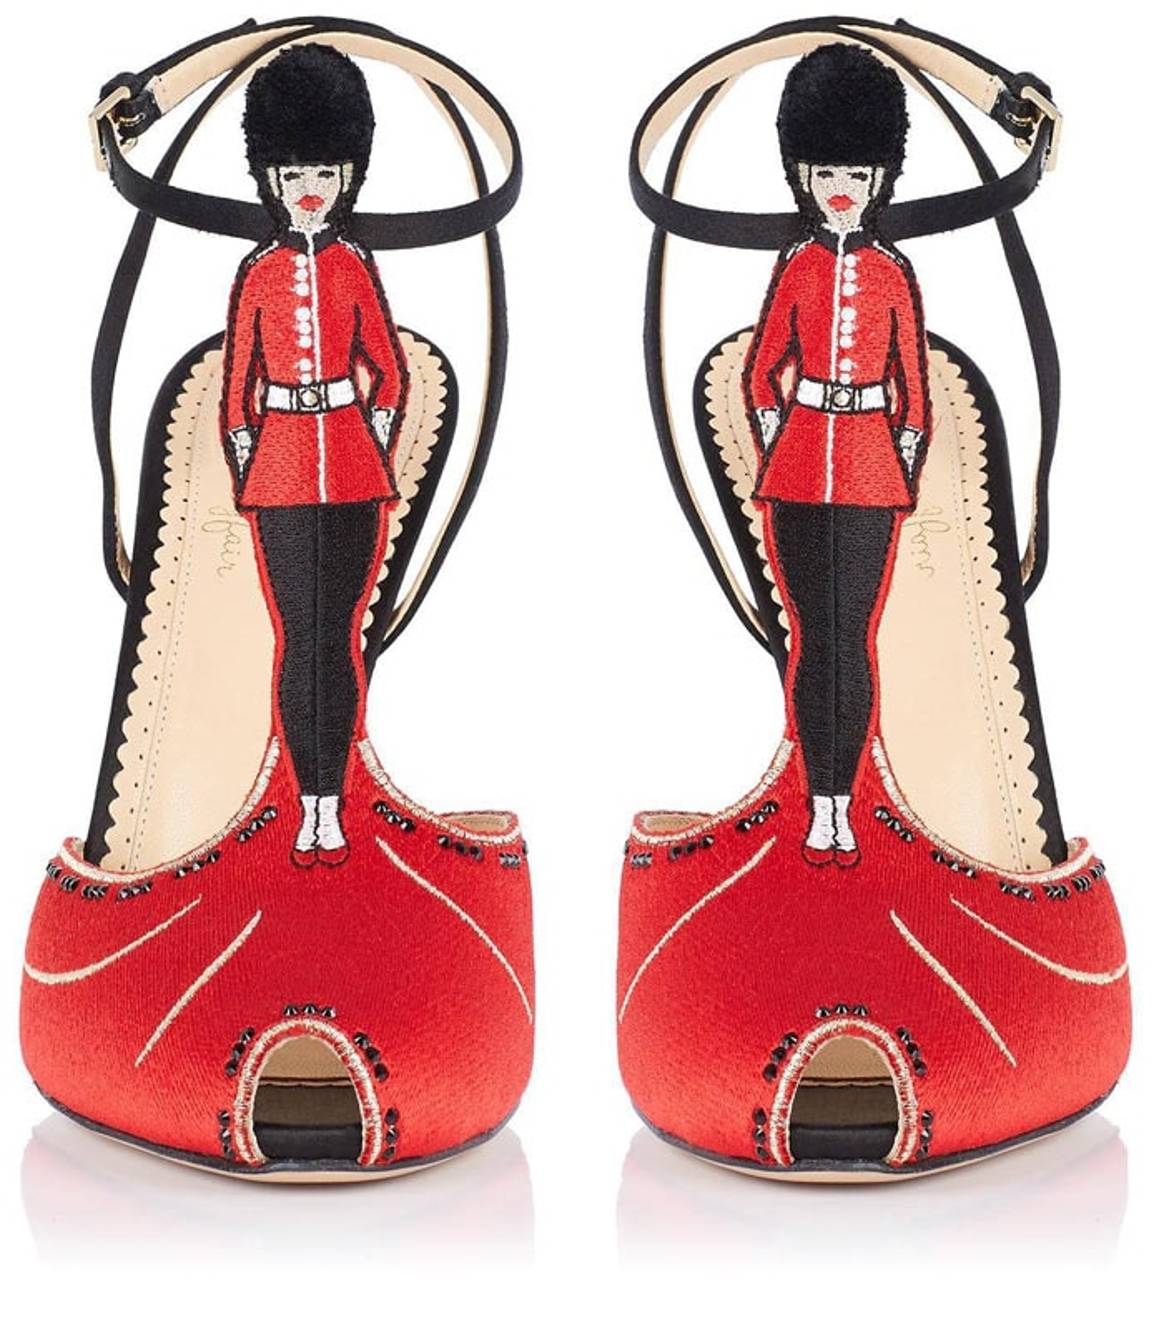 Charlotte Olympia launches footwear scholarship